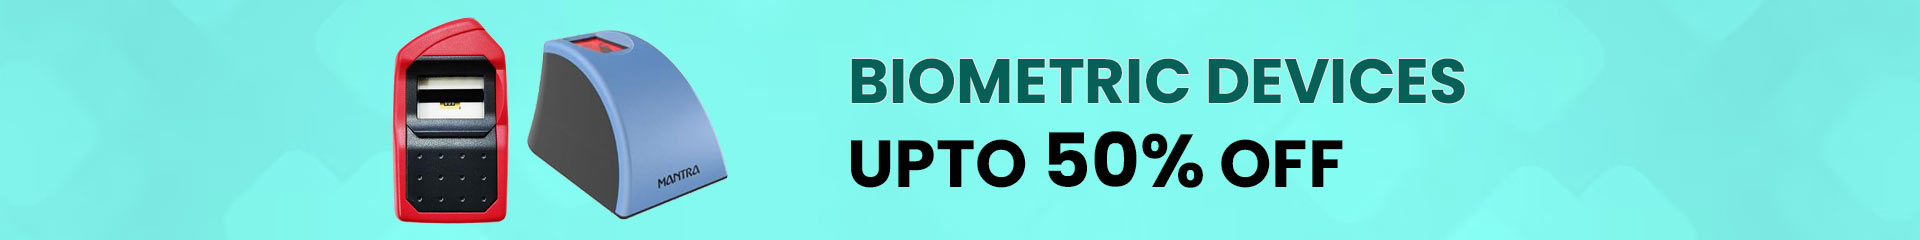 Biometric devices upto 50 percent off category banner